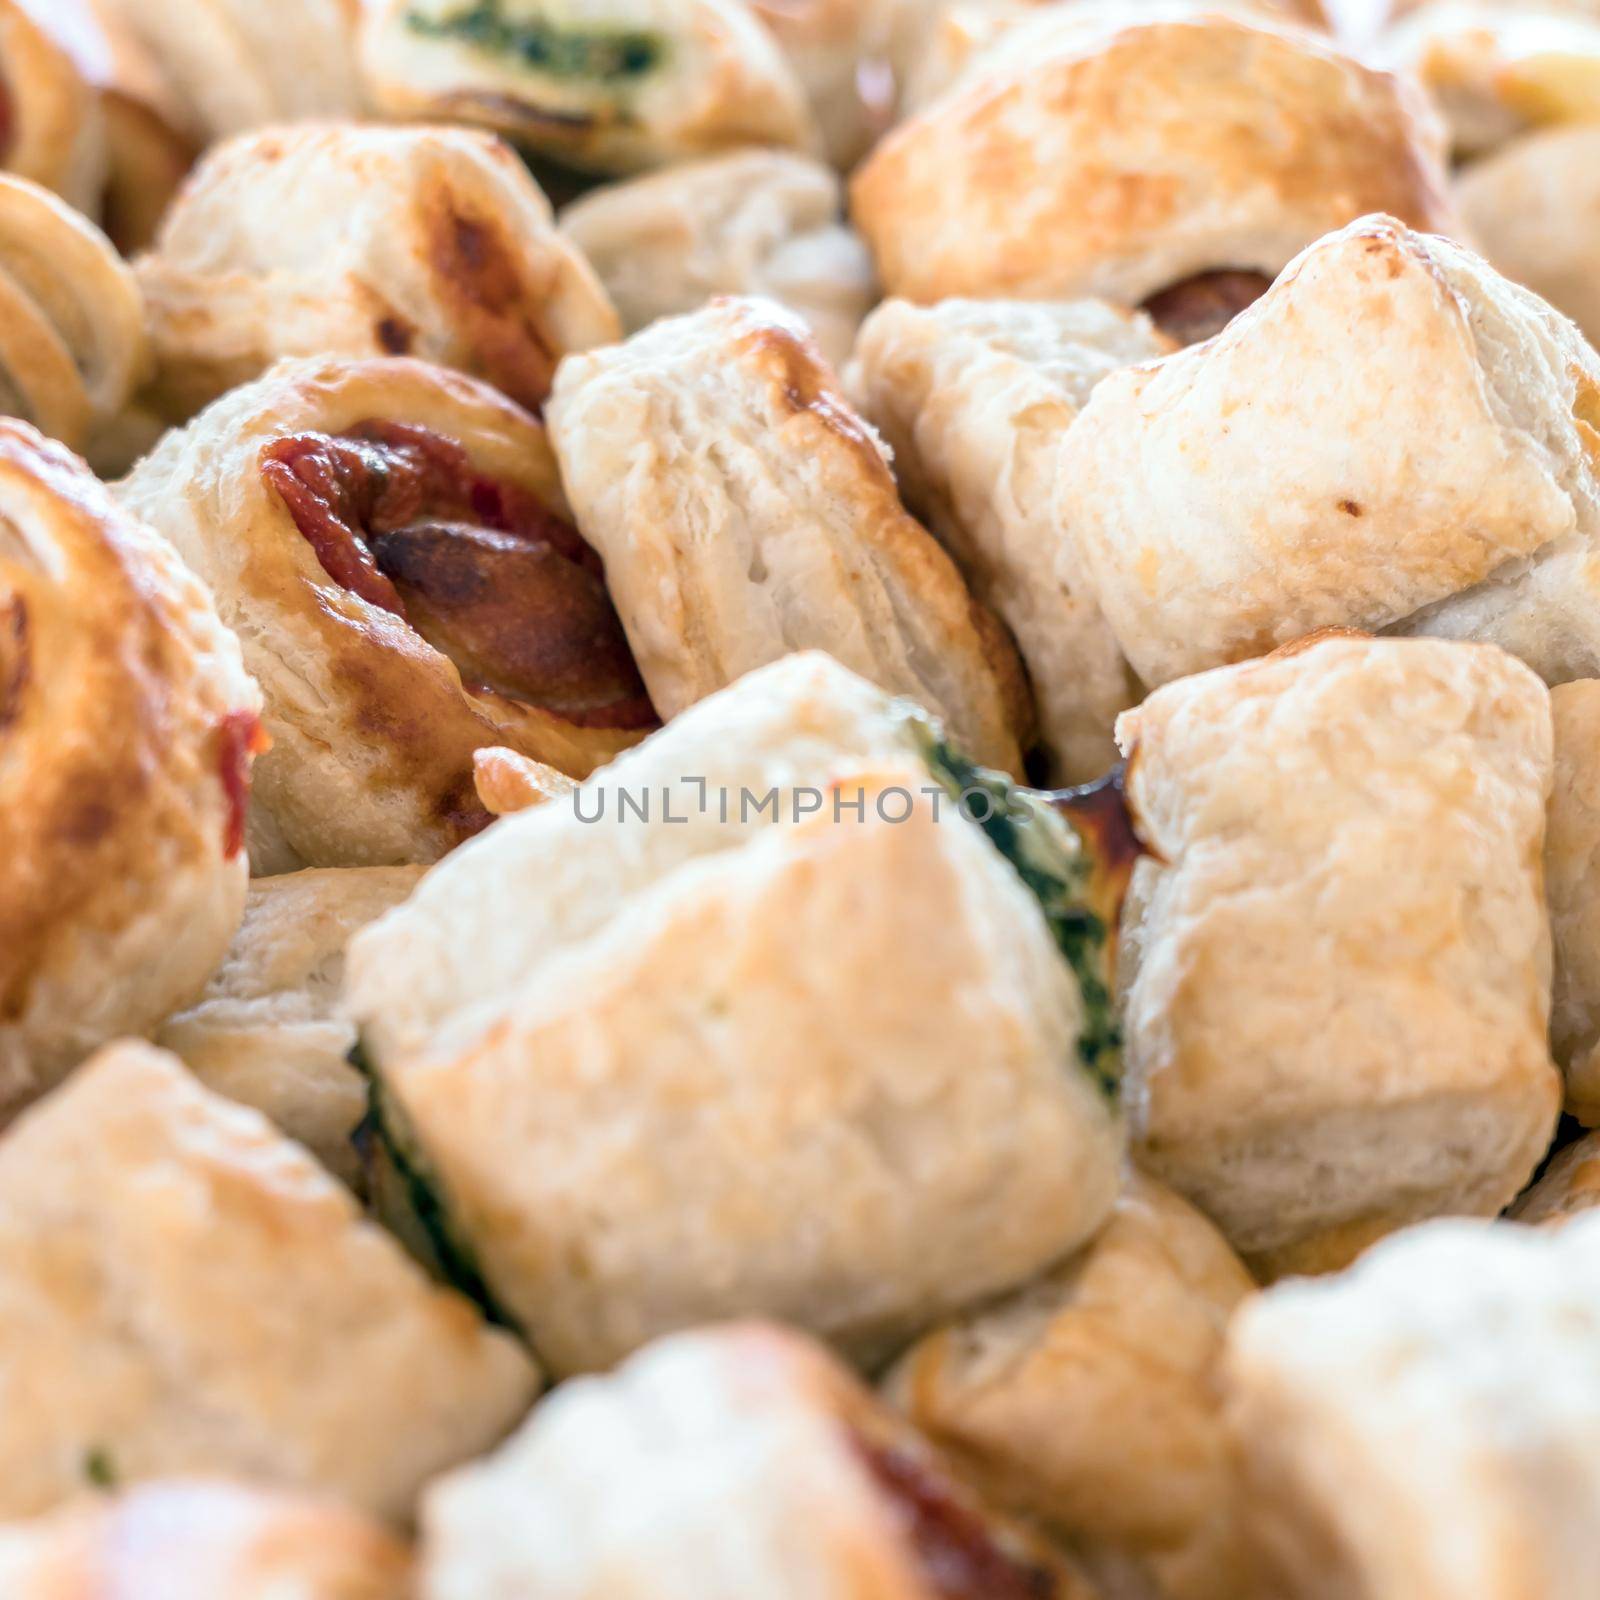 Small pizzas made of puff pastry by germanopoli